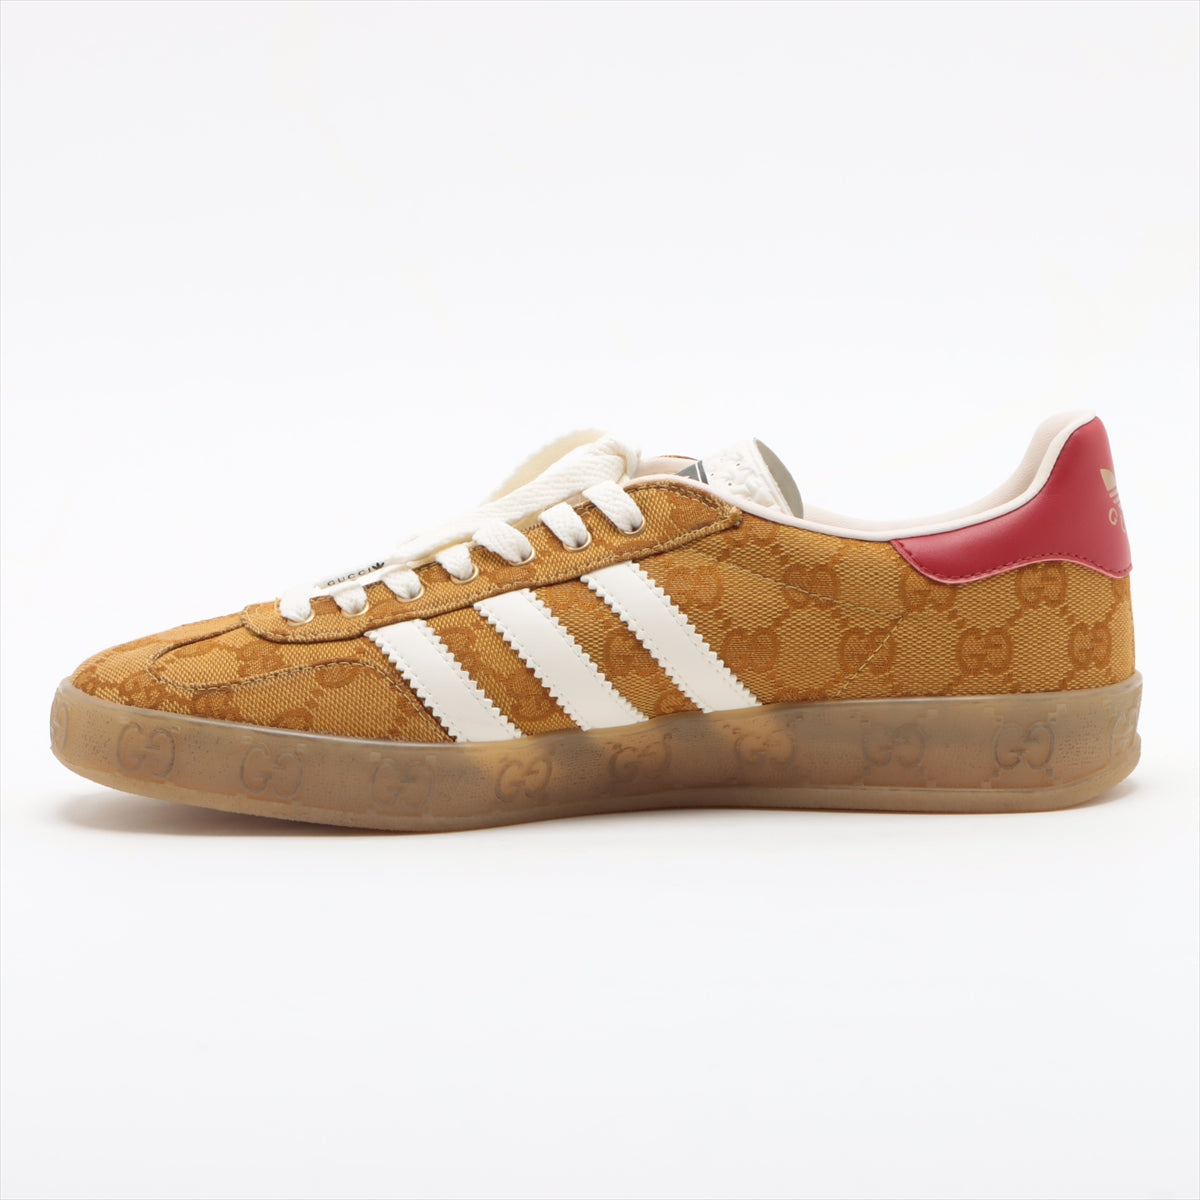 Gucci x adidas Gazelle Canvas & leather Sneakers 25.5㎝ Ladies' Brown HQ8850